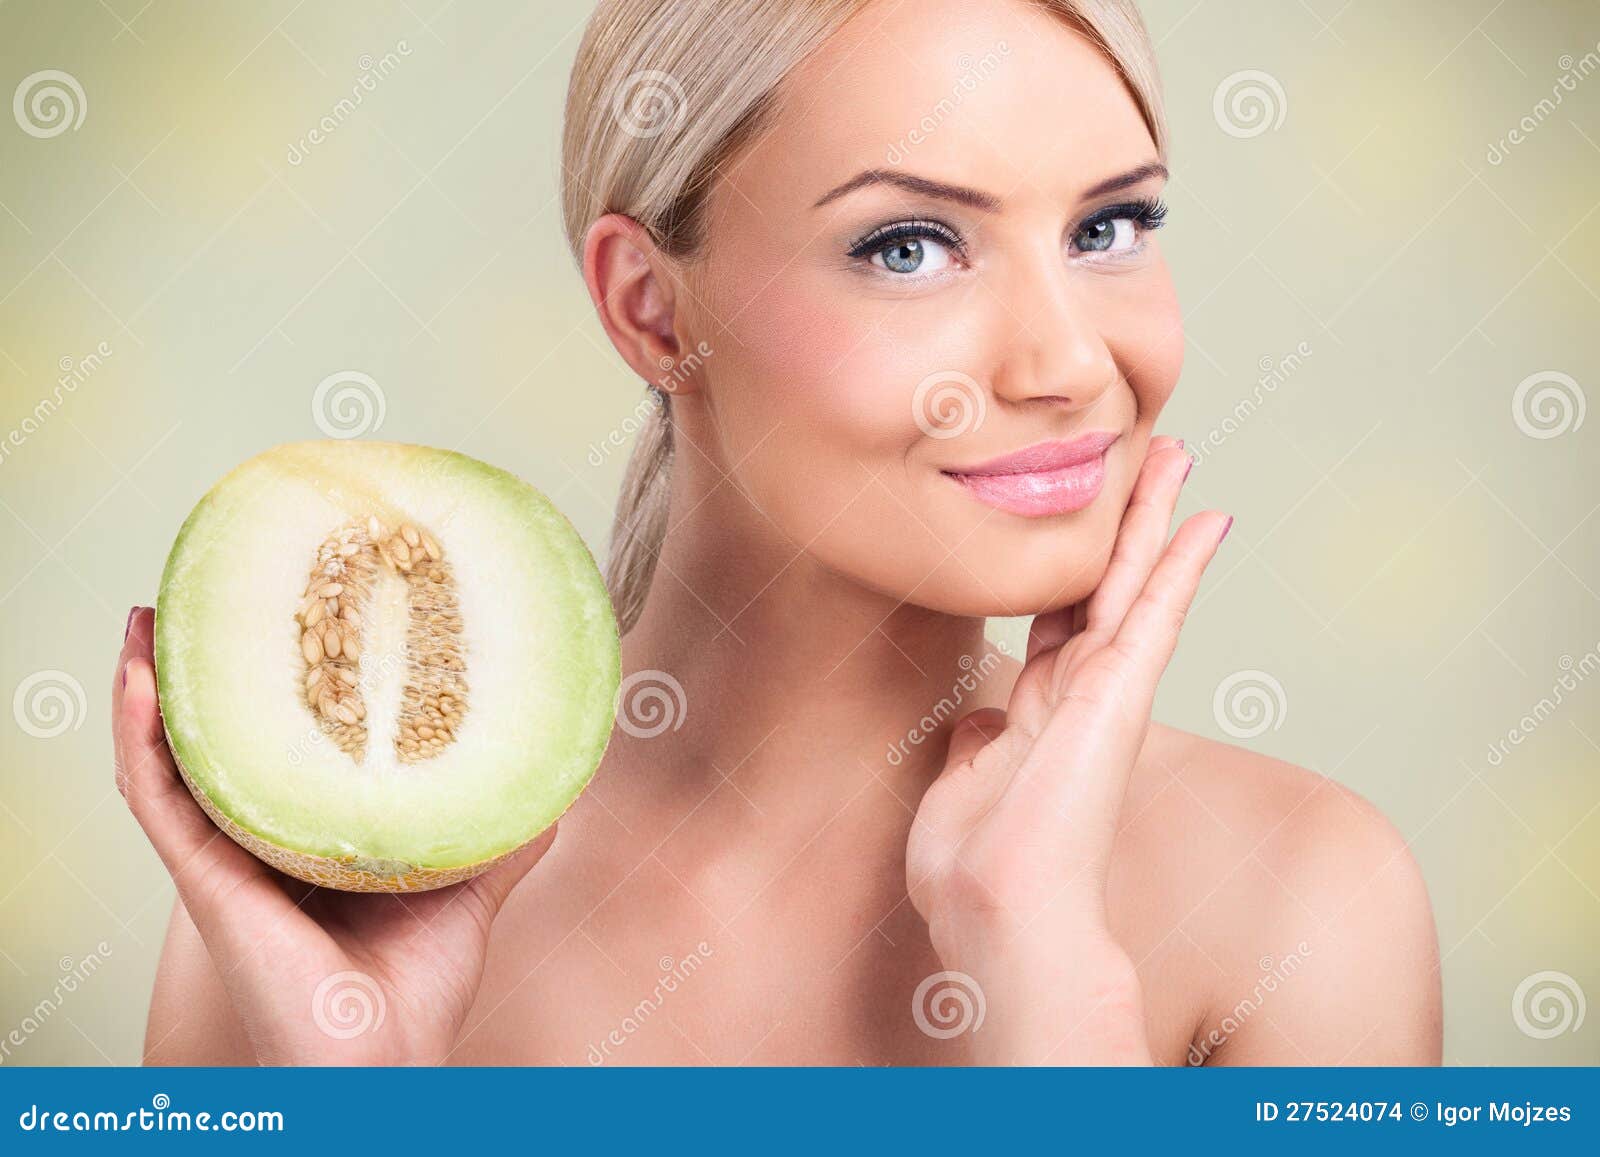 Women With Healthy Skin Thanks To The Melons Stock Images ...